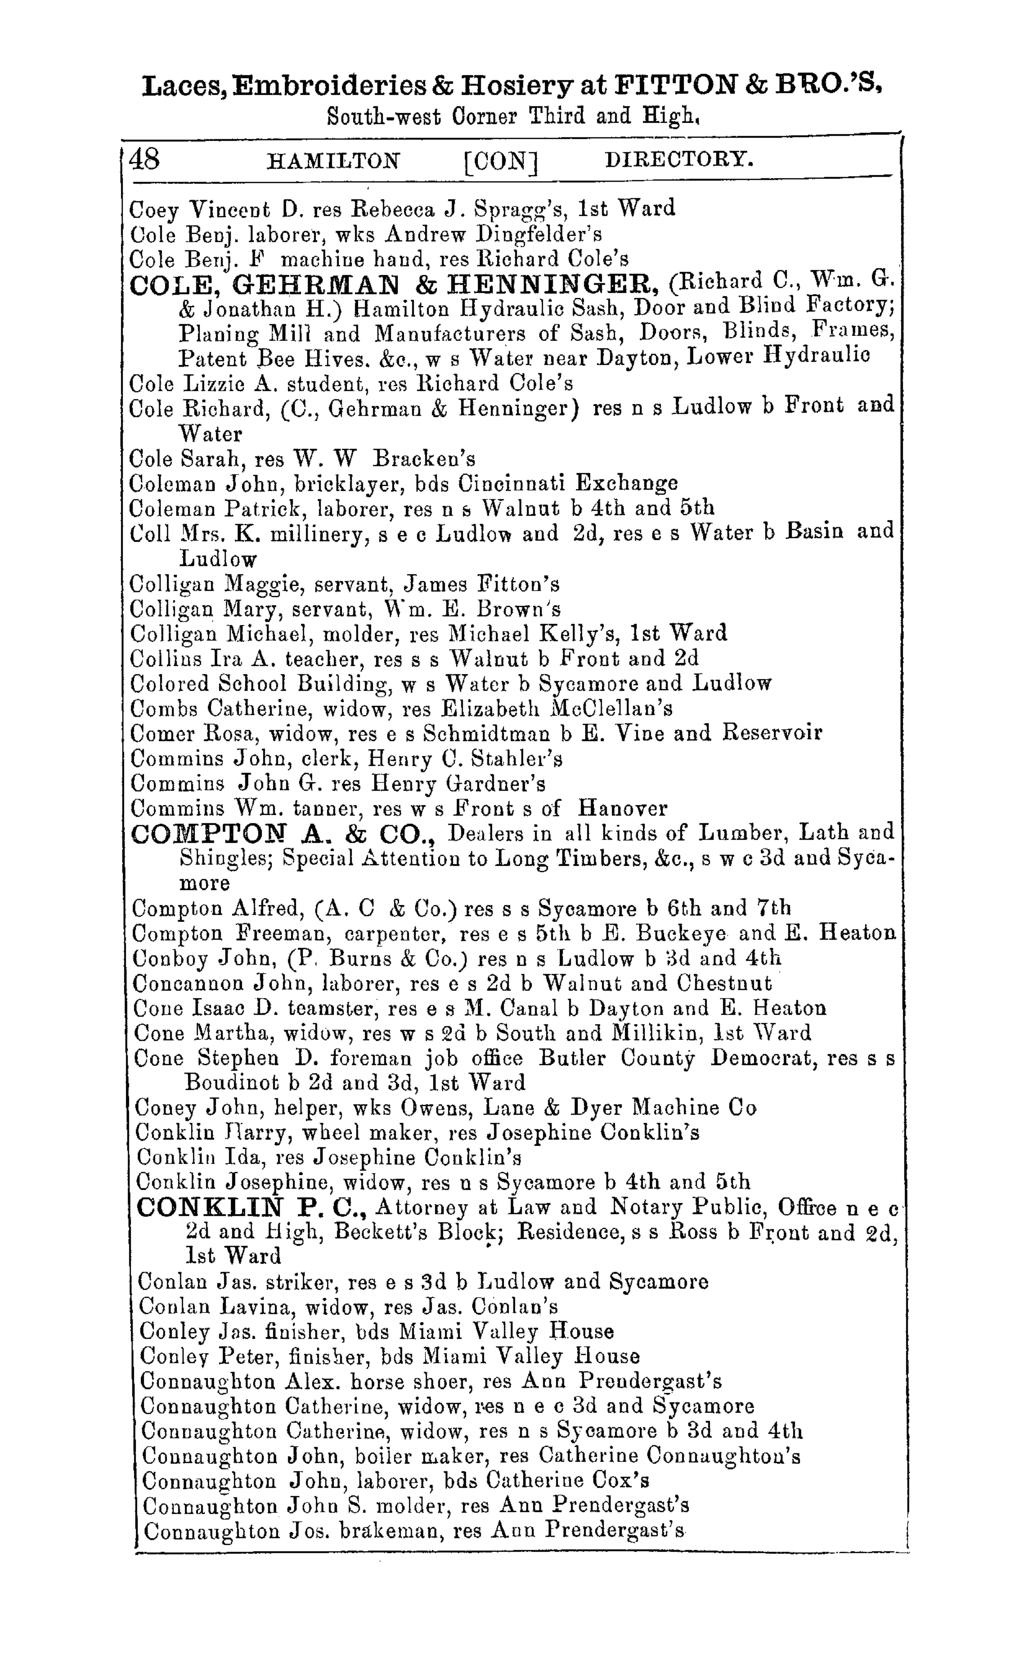 Laces, Embroideries & Hosiery at FITTON & BUO.'S, South-west Corner Third and High. ----------------, 48 HAMILTON [OON] DIRECTORY. Ooey Vincent D. res Rebecca J. Spragg's, 1st Ward Oole Benj.